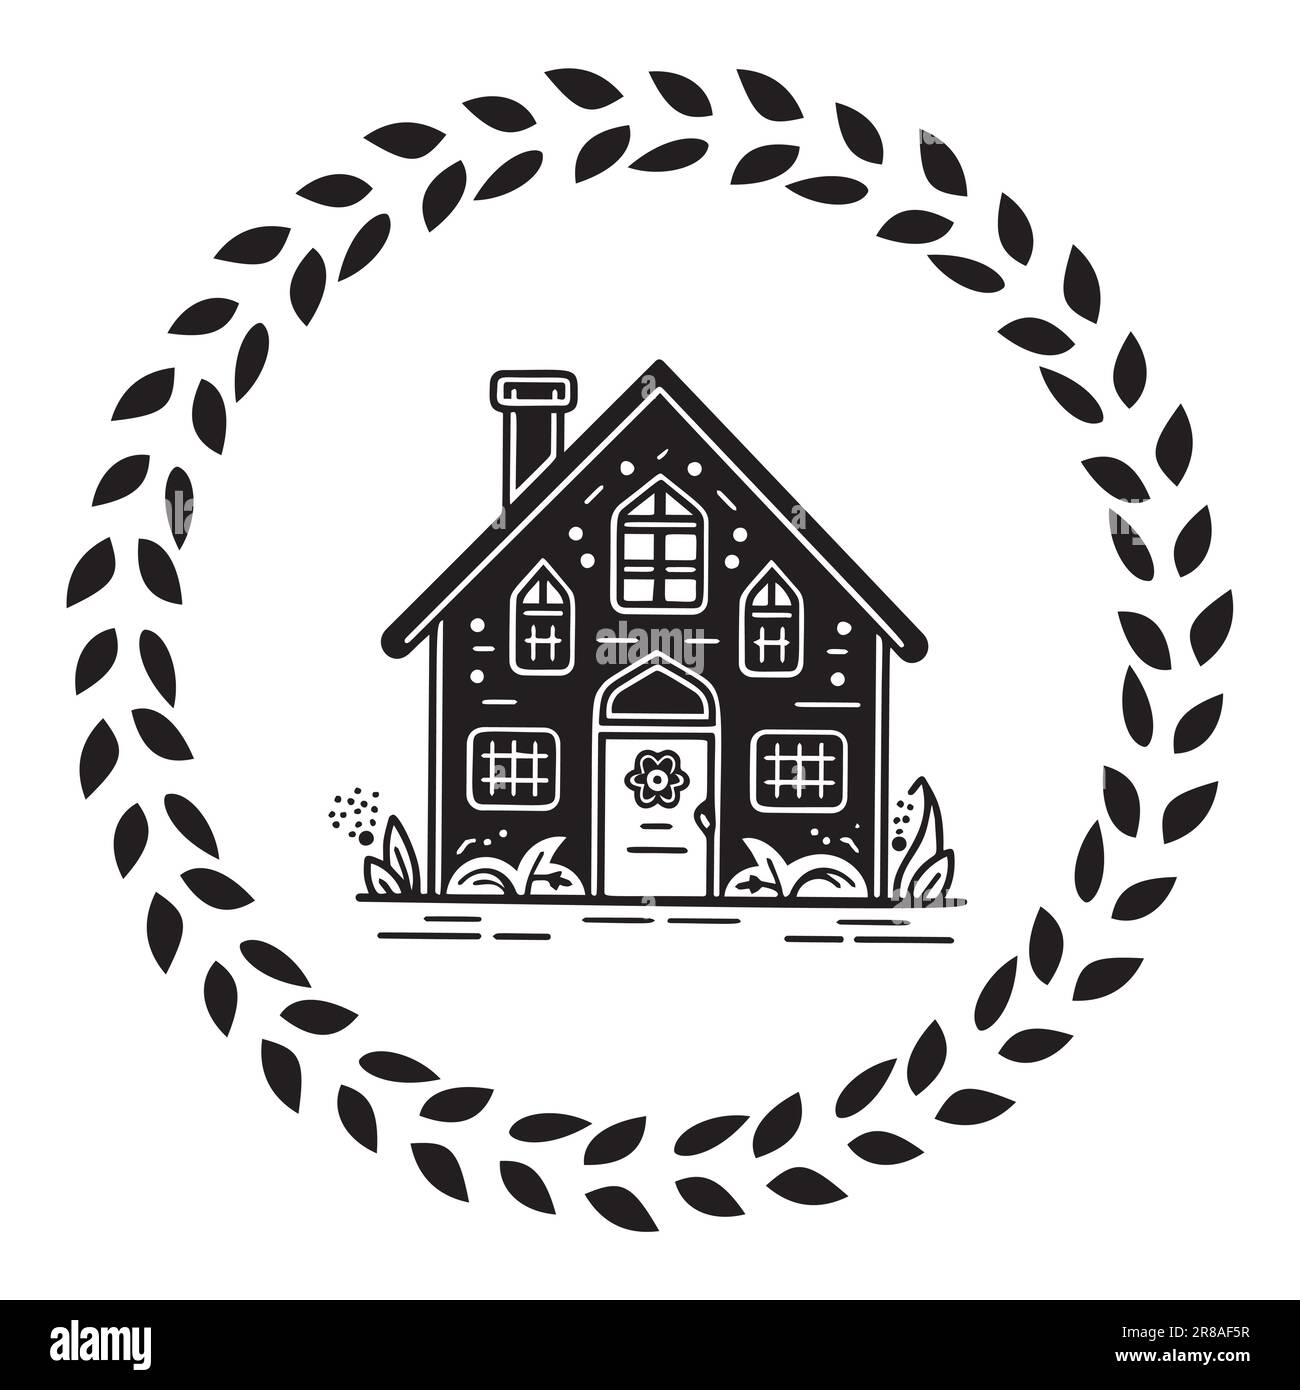 Cute rustic cottage motif in vintage style frame. Vector illustration of whimsical rural country house.  Stock Vector